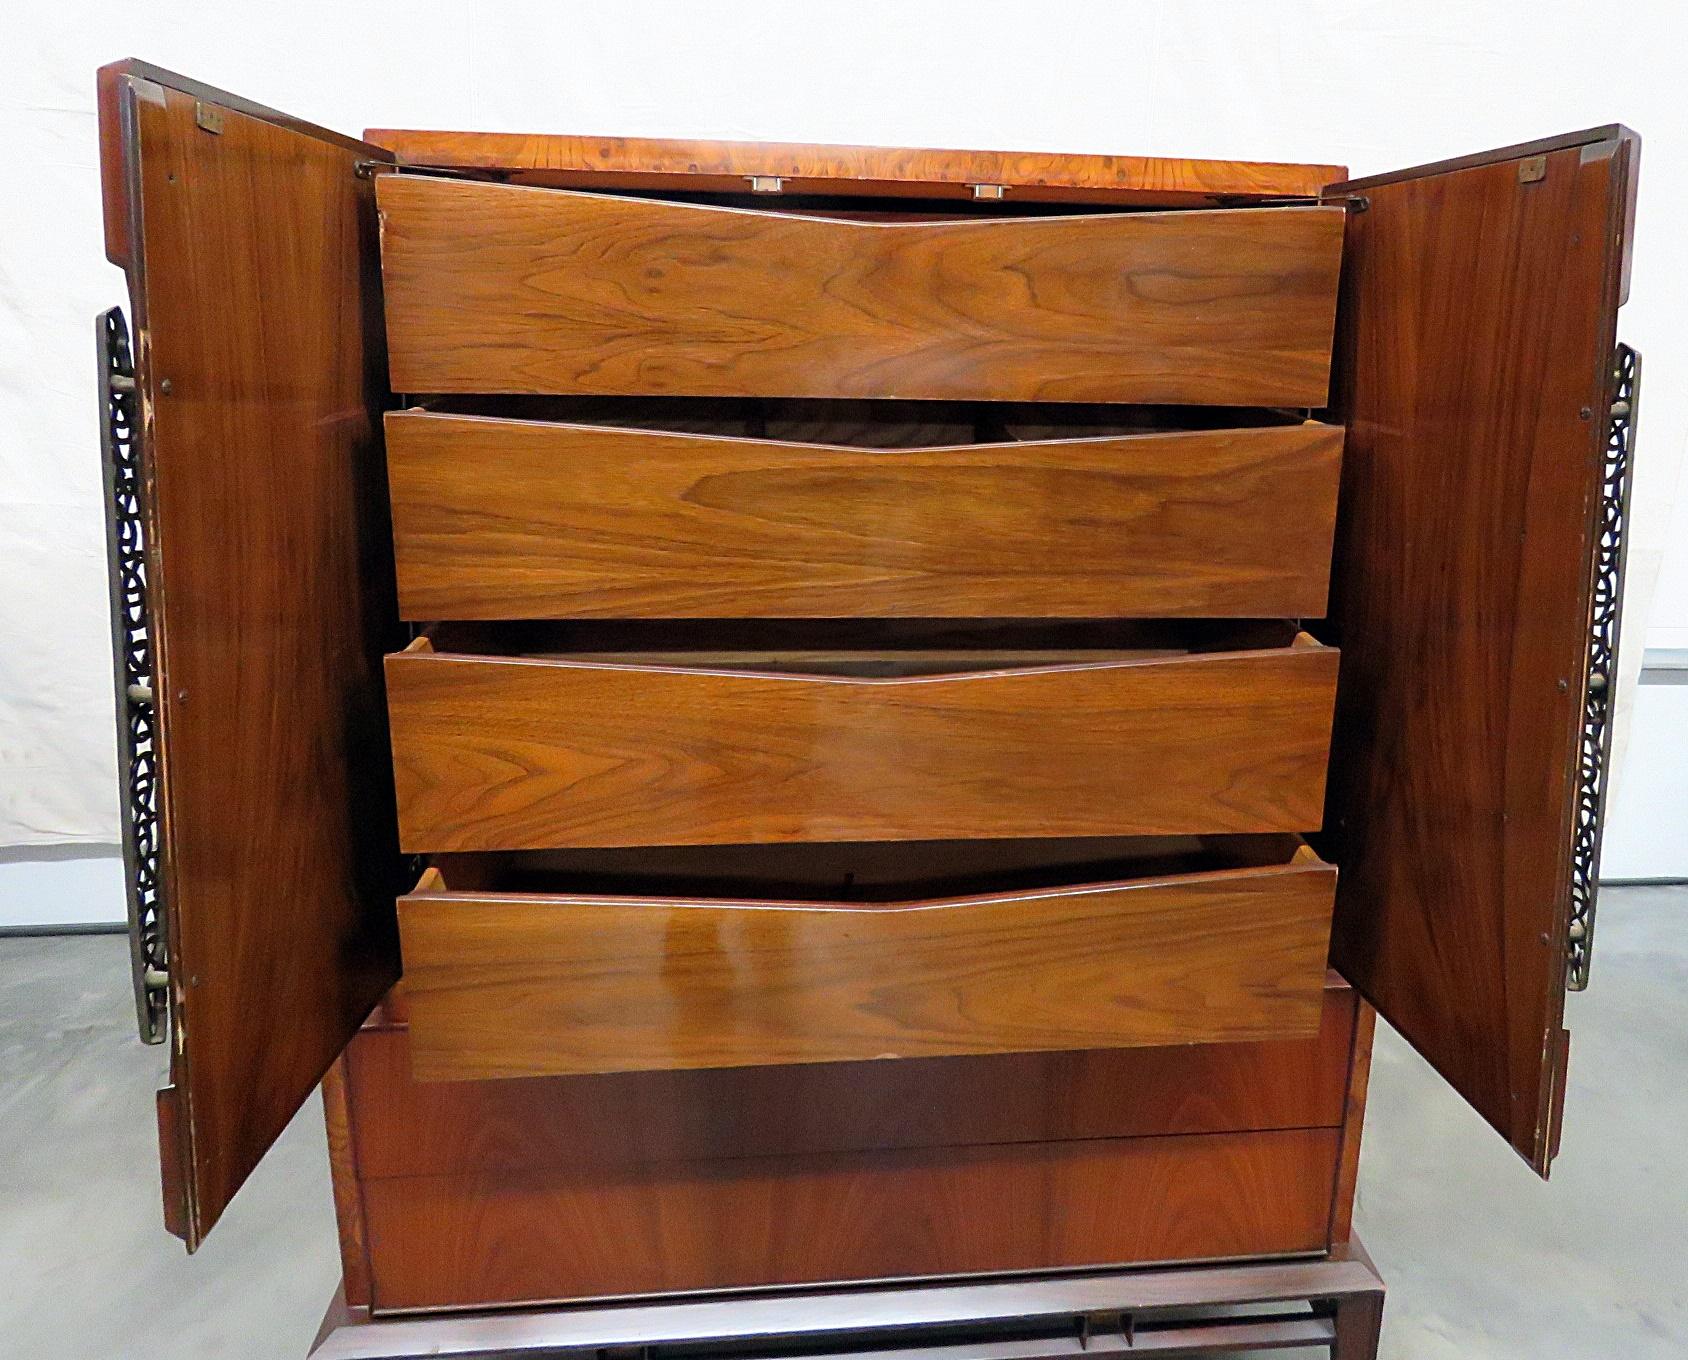 Detroit furniture company Mid-Century Modern gentleman's chest with 2 doors containing 4 drawers over 2 drawers.